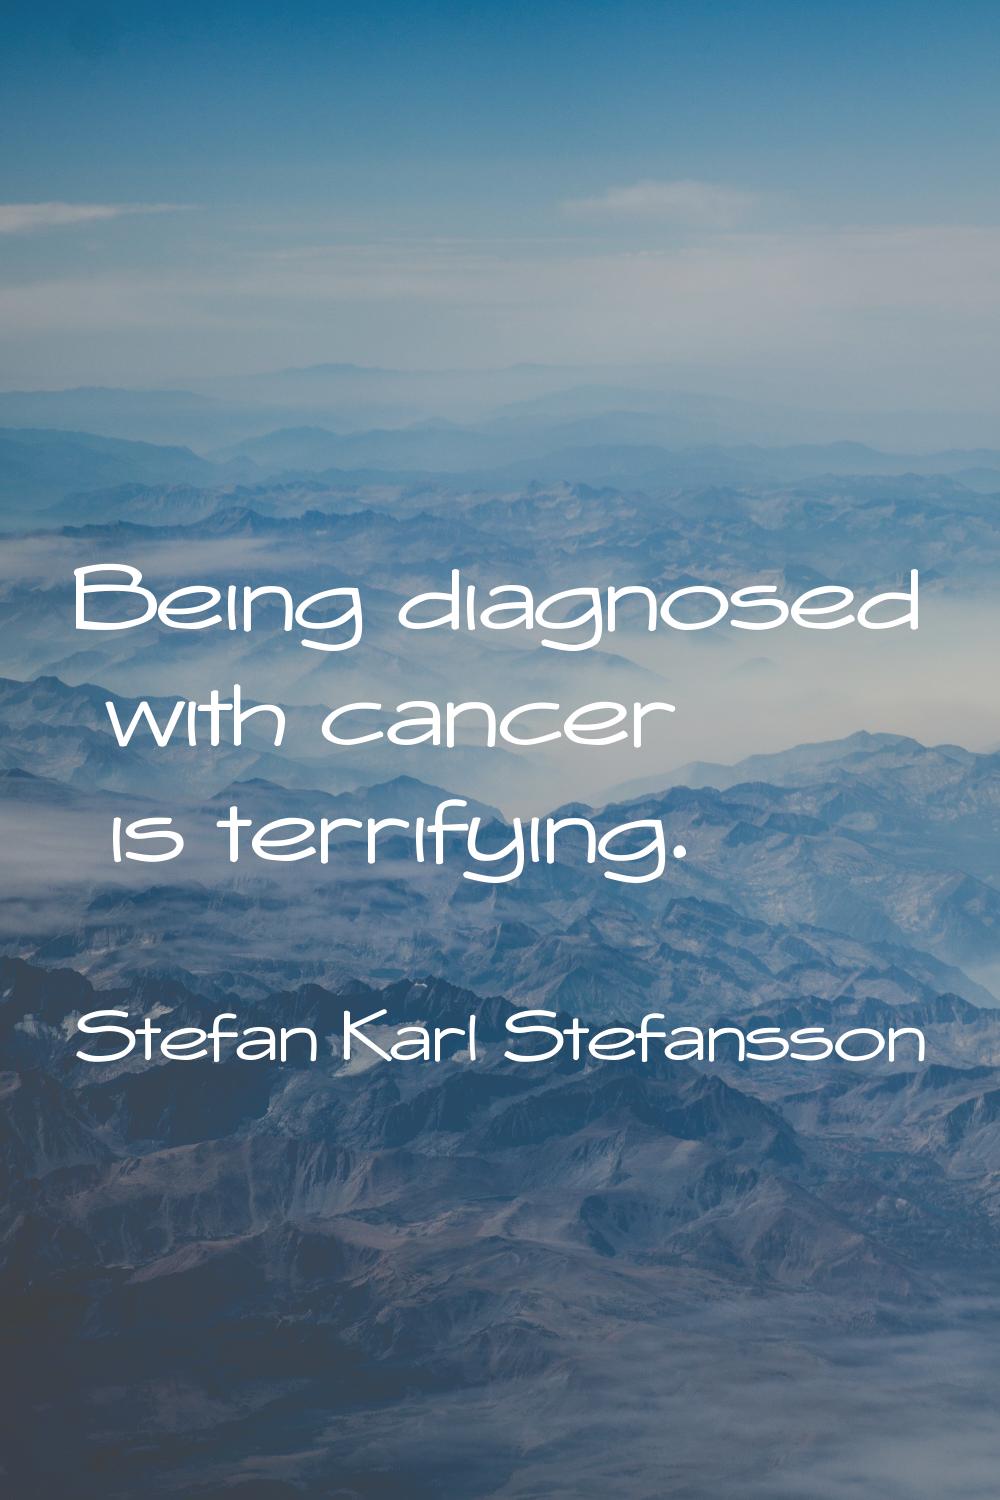 Being diagnosed with cancer is terrifying.